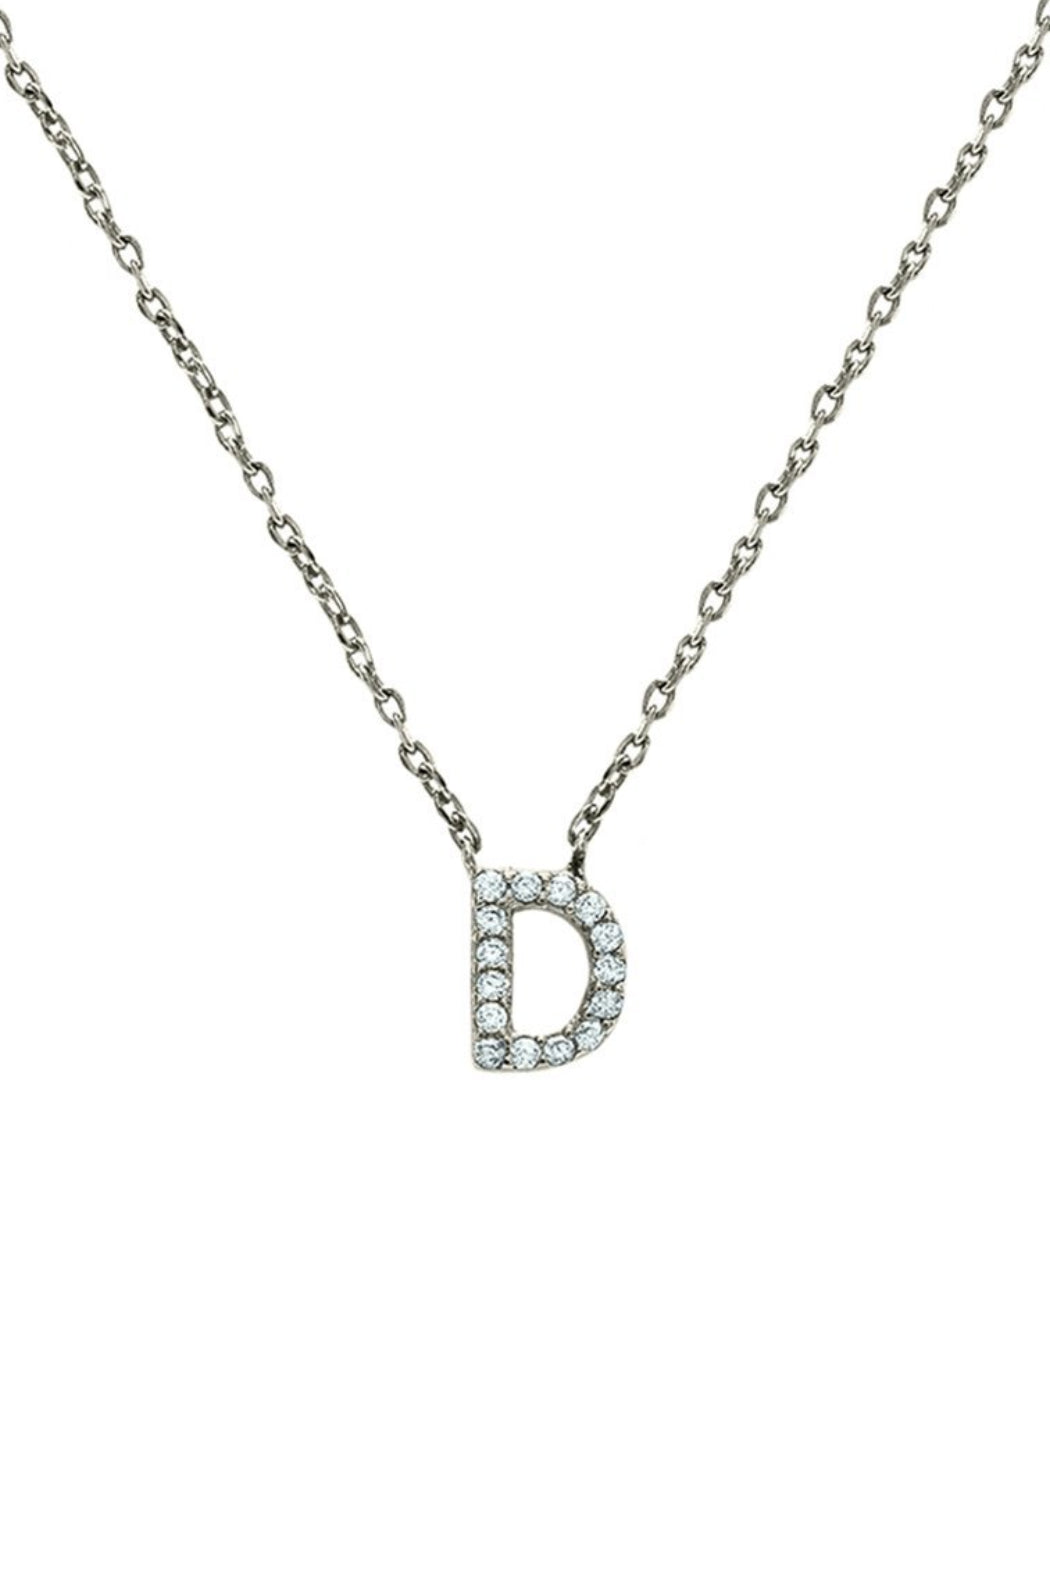 Block CZ Initial Necklace - Embellish Your Life 